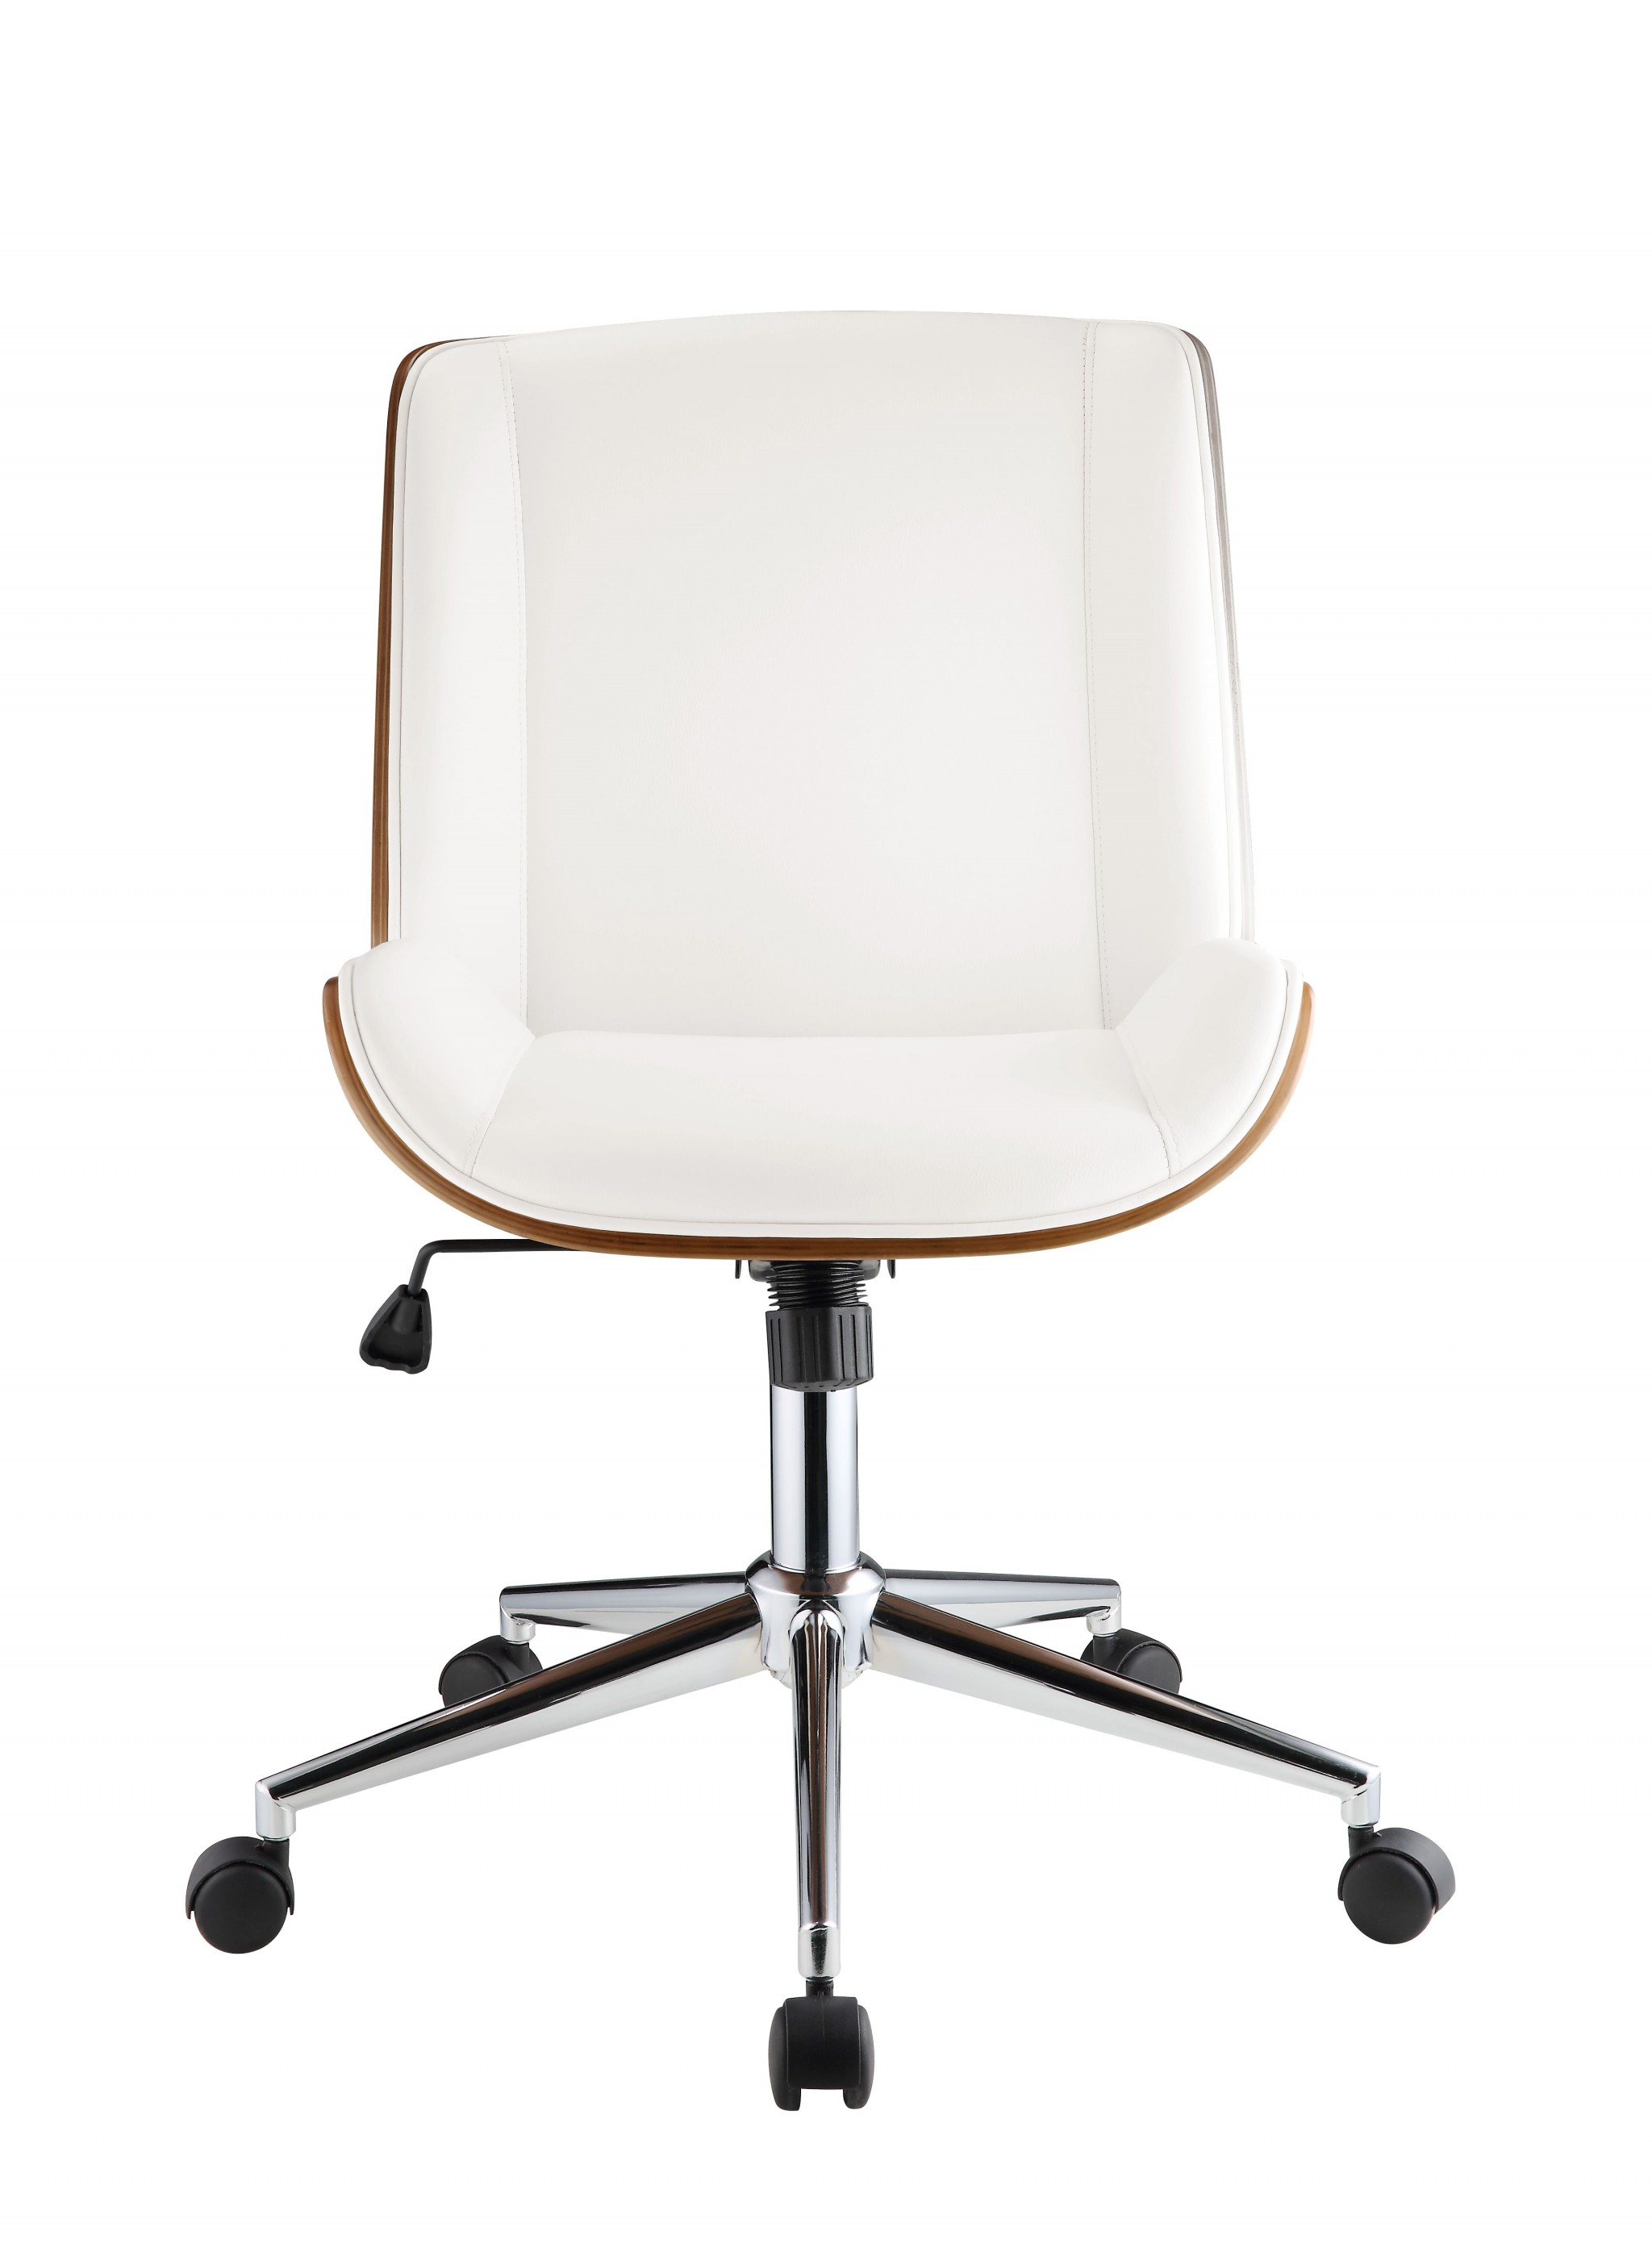 21" X 25" X 3438" White Leatherette And Walnut Office Chair